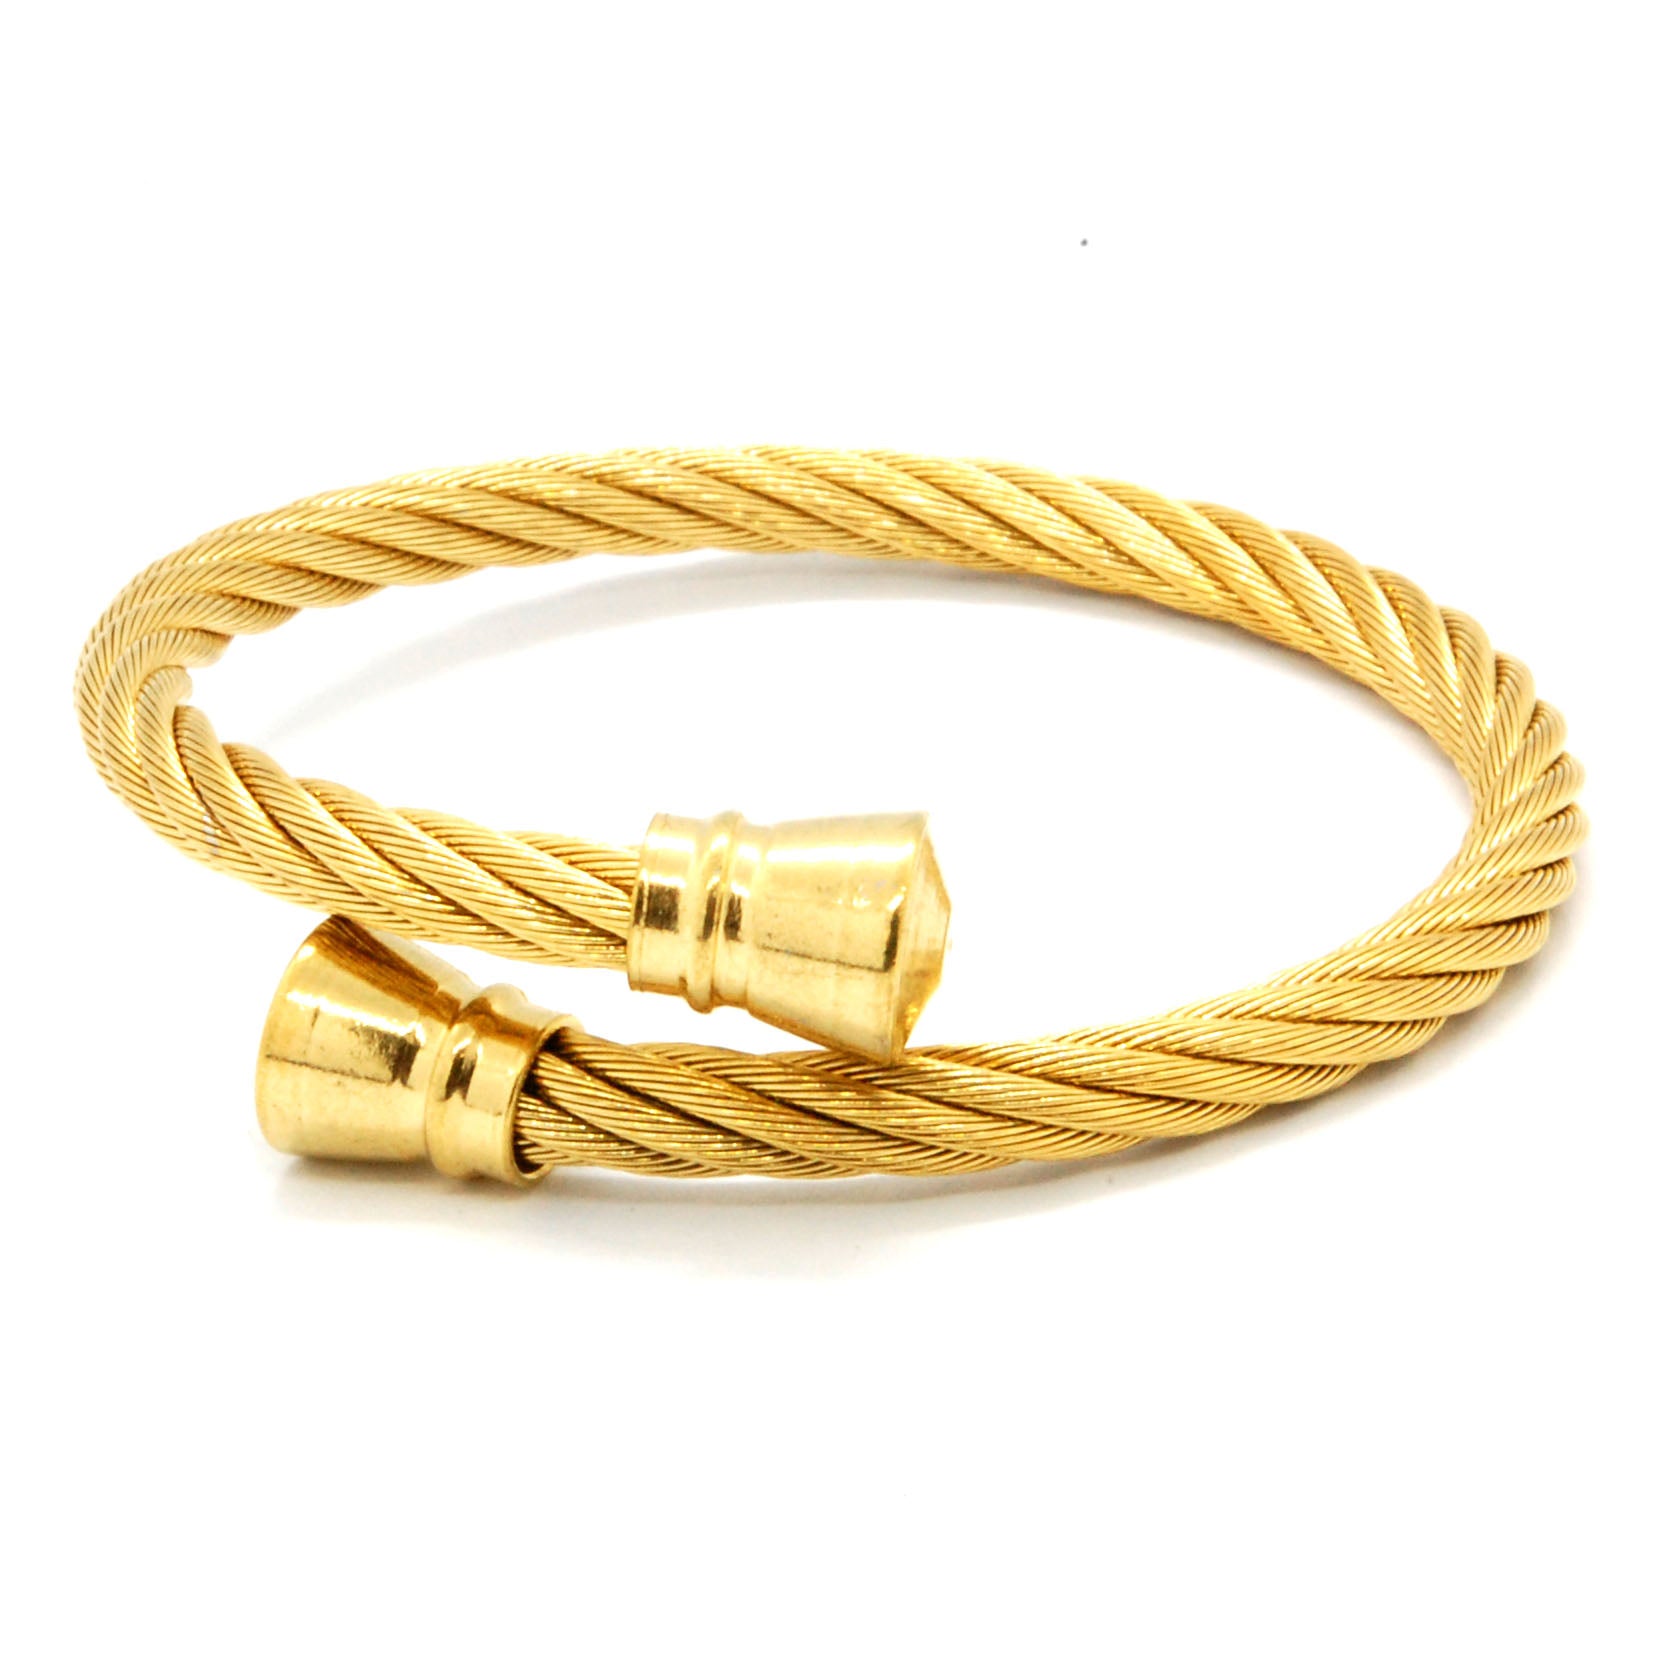 ESBG 6570: Gold-Plated Charriol Bangle w/ Gold-Plated Barrel Ends